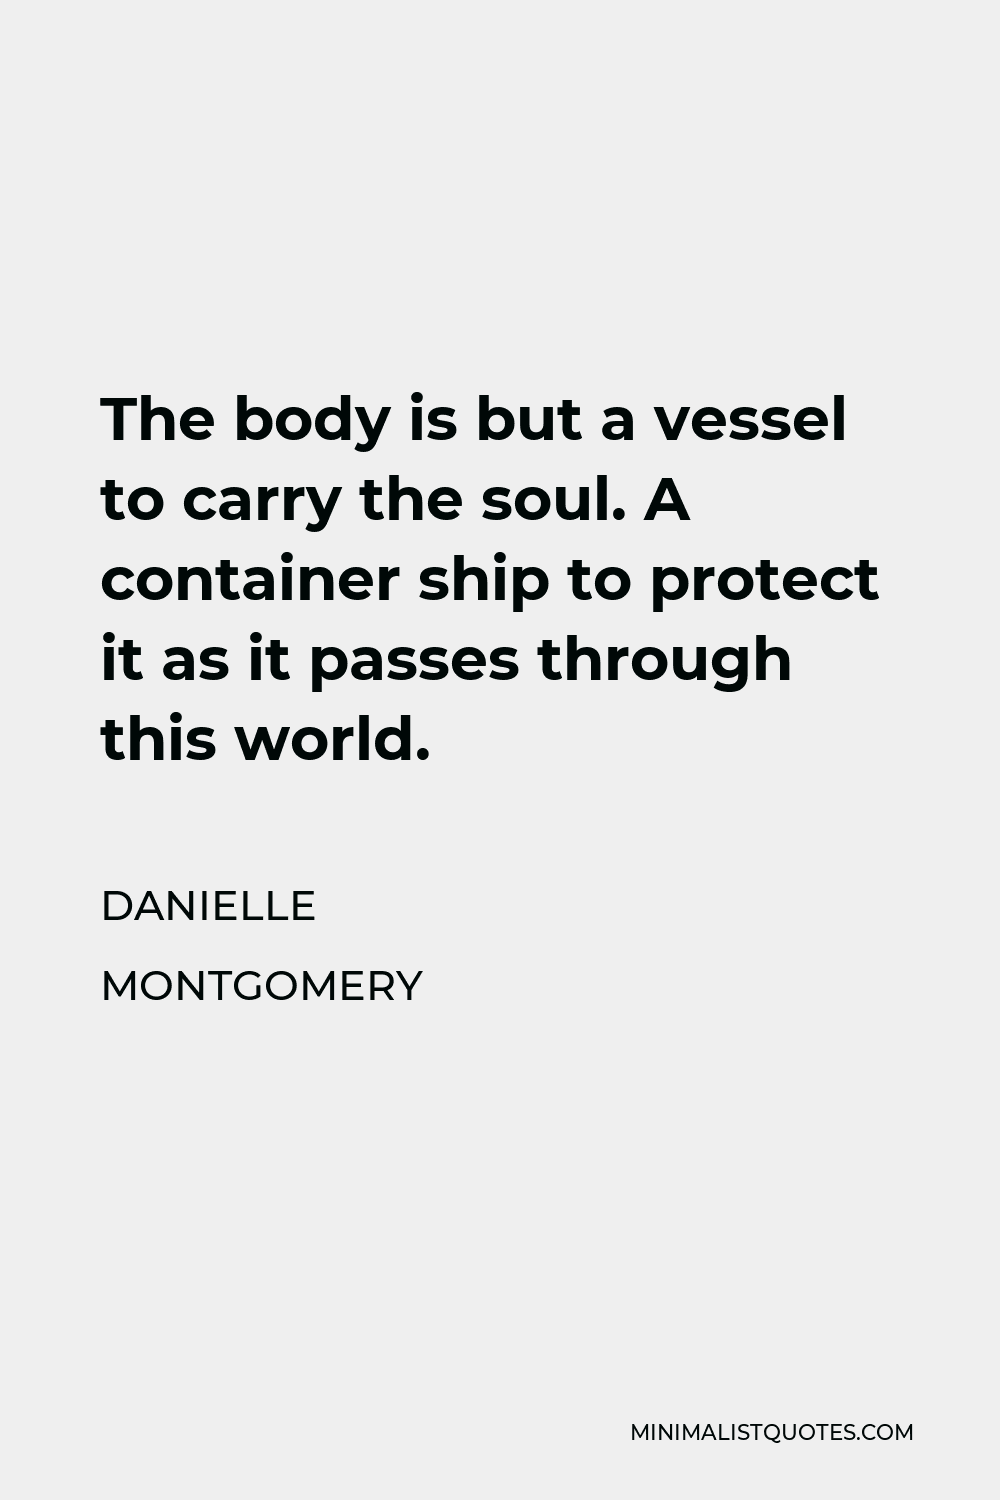 Danielle Montgomery Quote - The body is but a vessel to carry the soul. A container ship to protect it as it passes through this world.